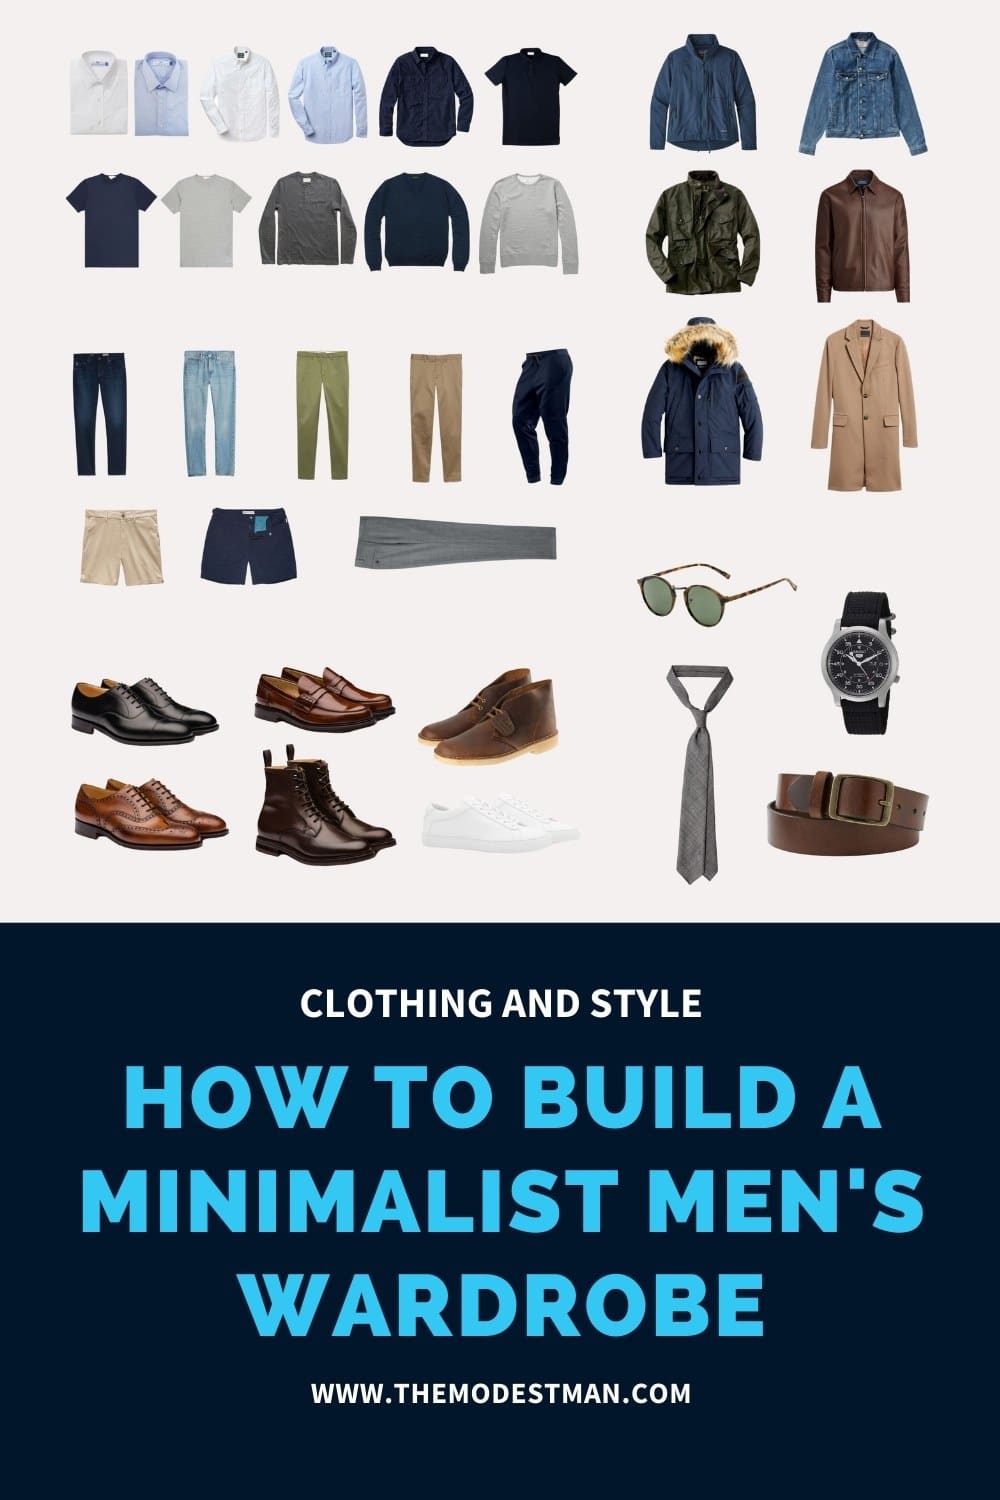 Minimalism and the problem with “wardrobe essentials” lists